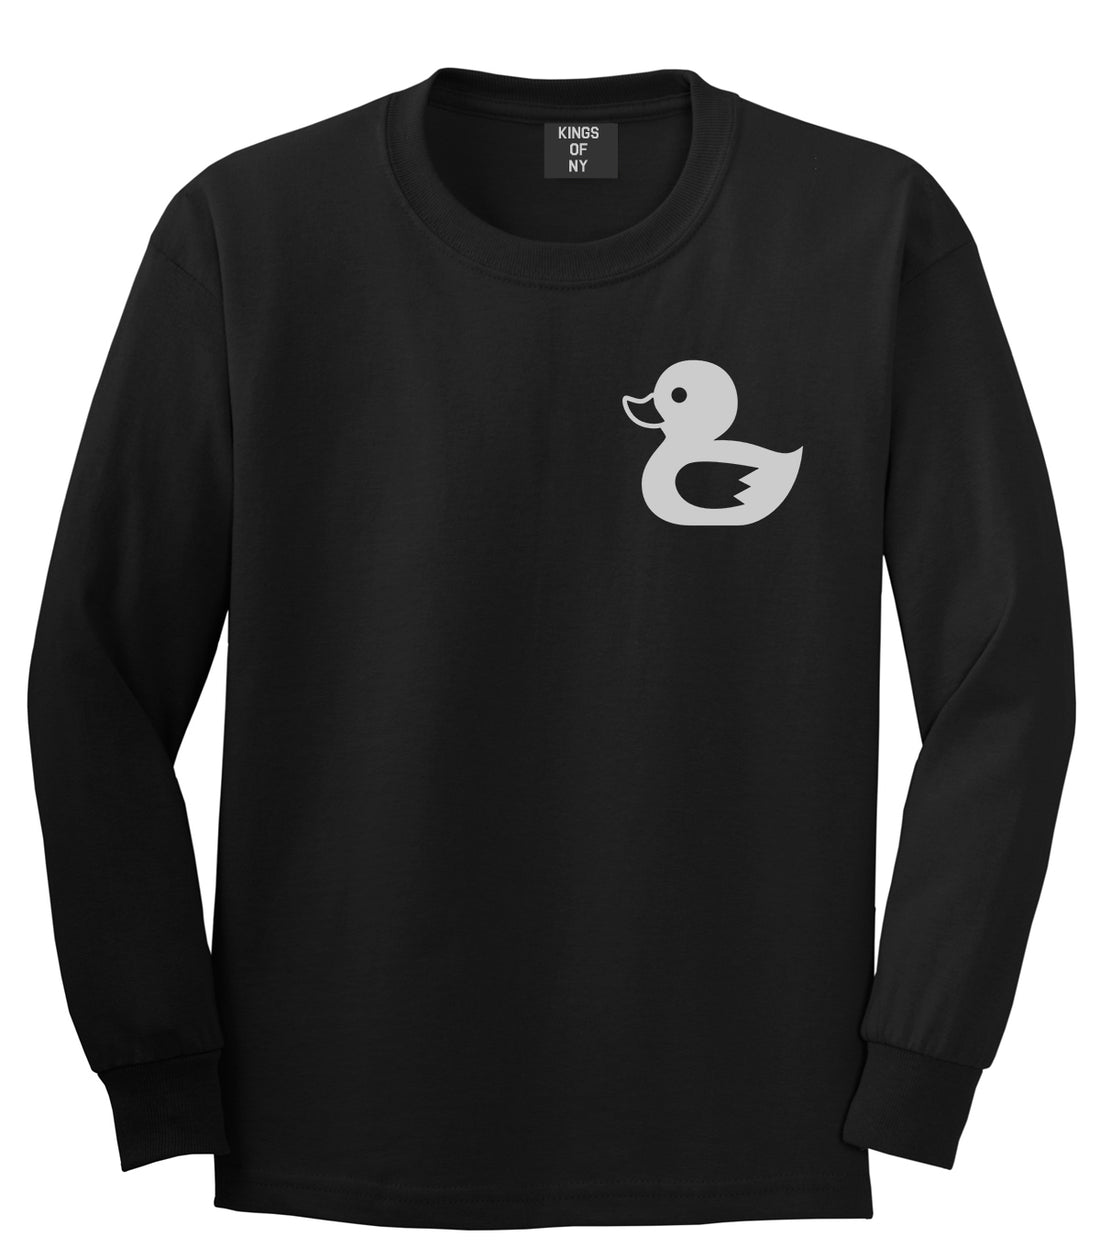 Rubber Duck Chest Mens Black Long Sleeve T-Shirt by Kings Of NY